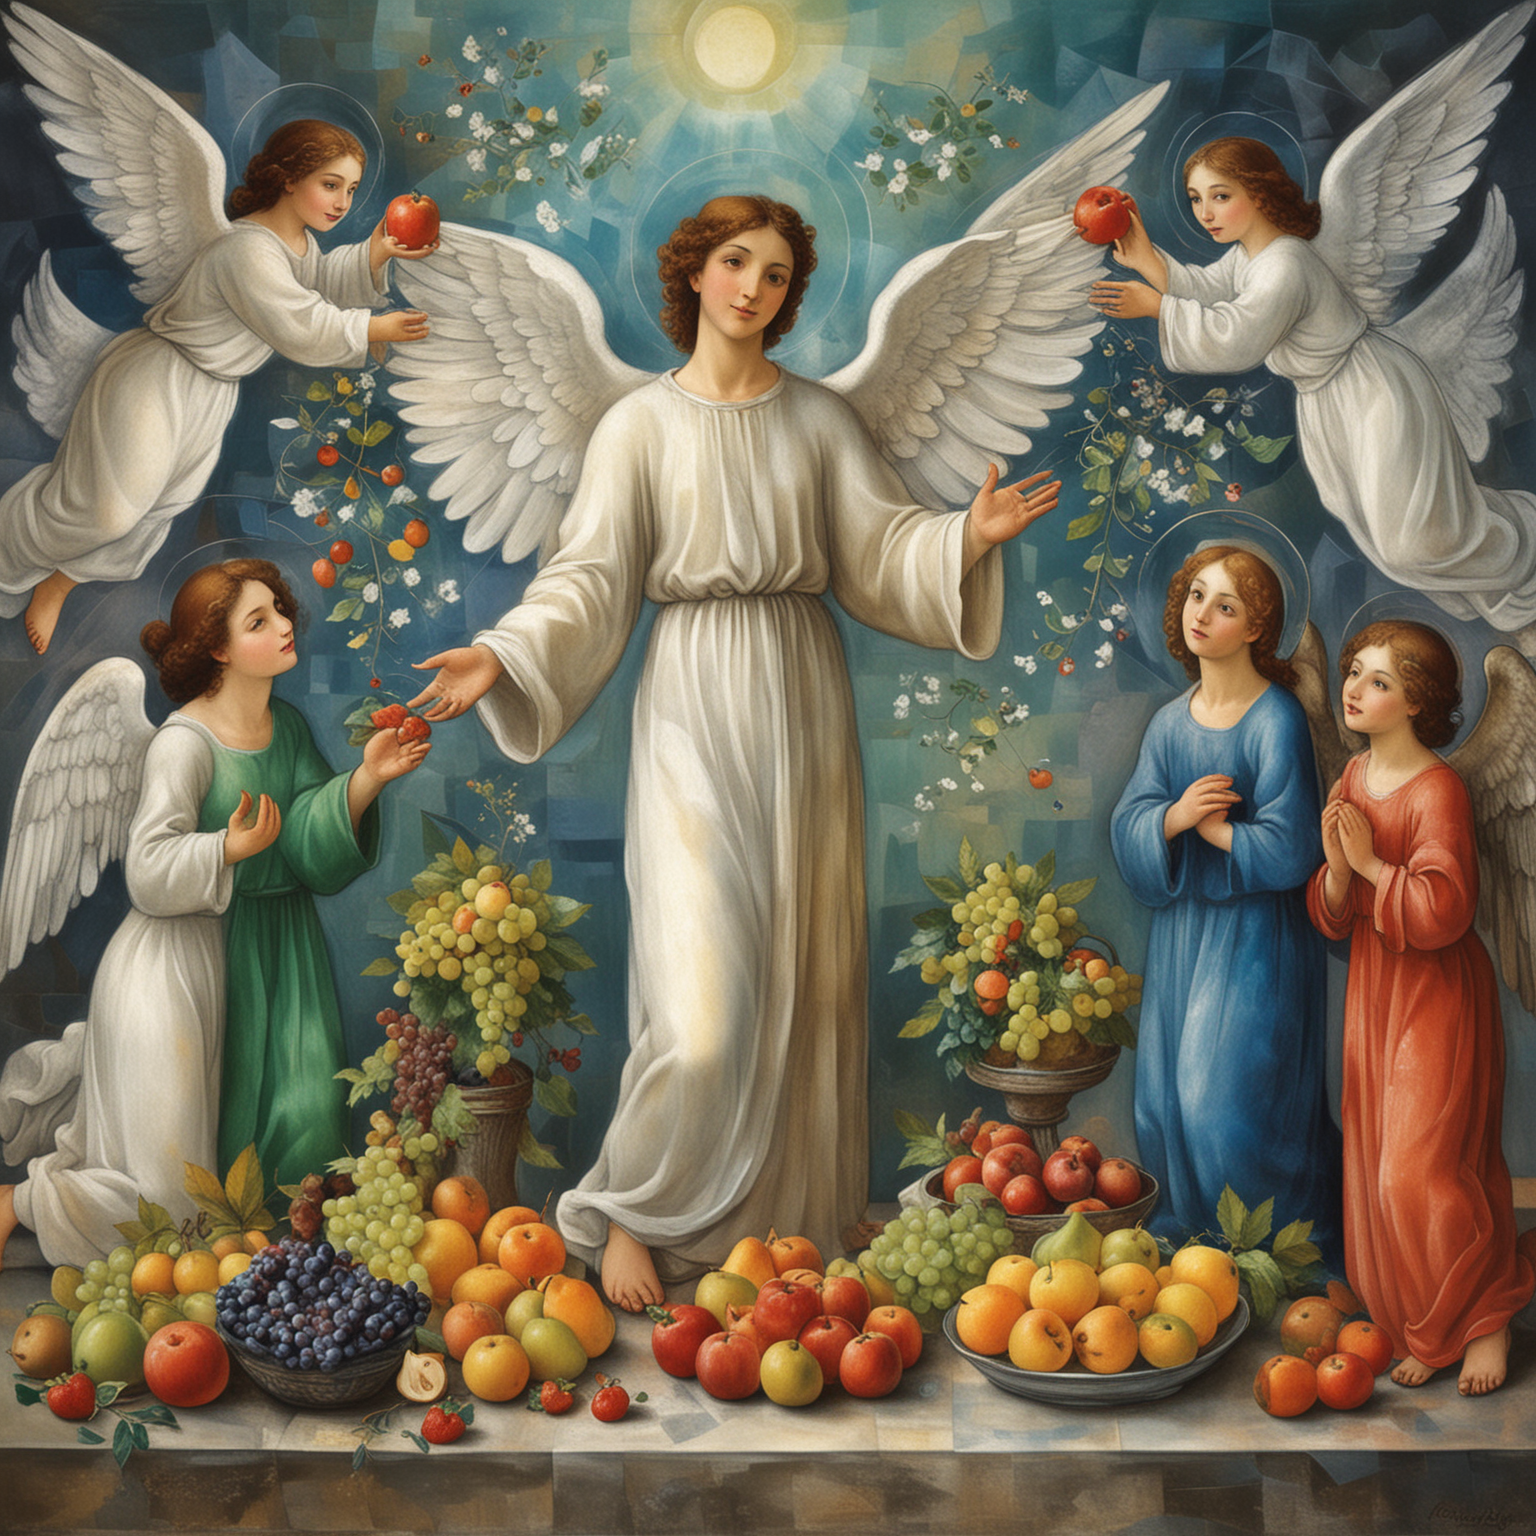 Chagall Style Painting Enrich Your Soul with Man and Angels Amid Abundant Fruits